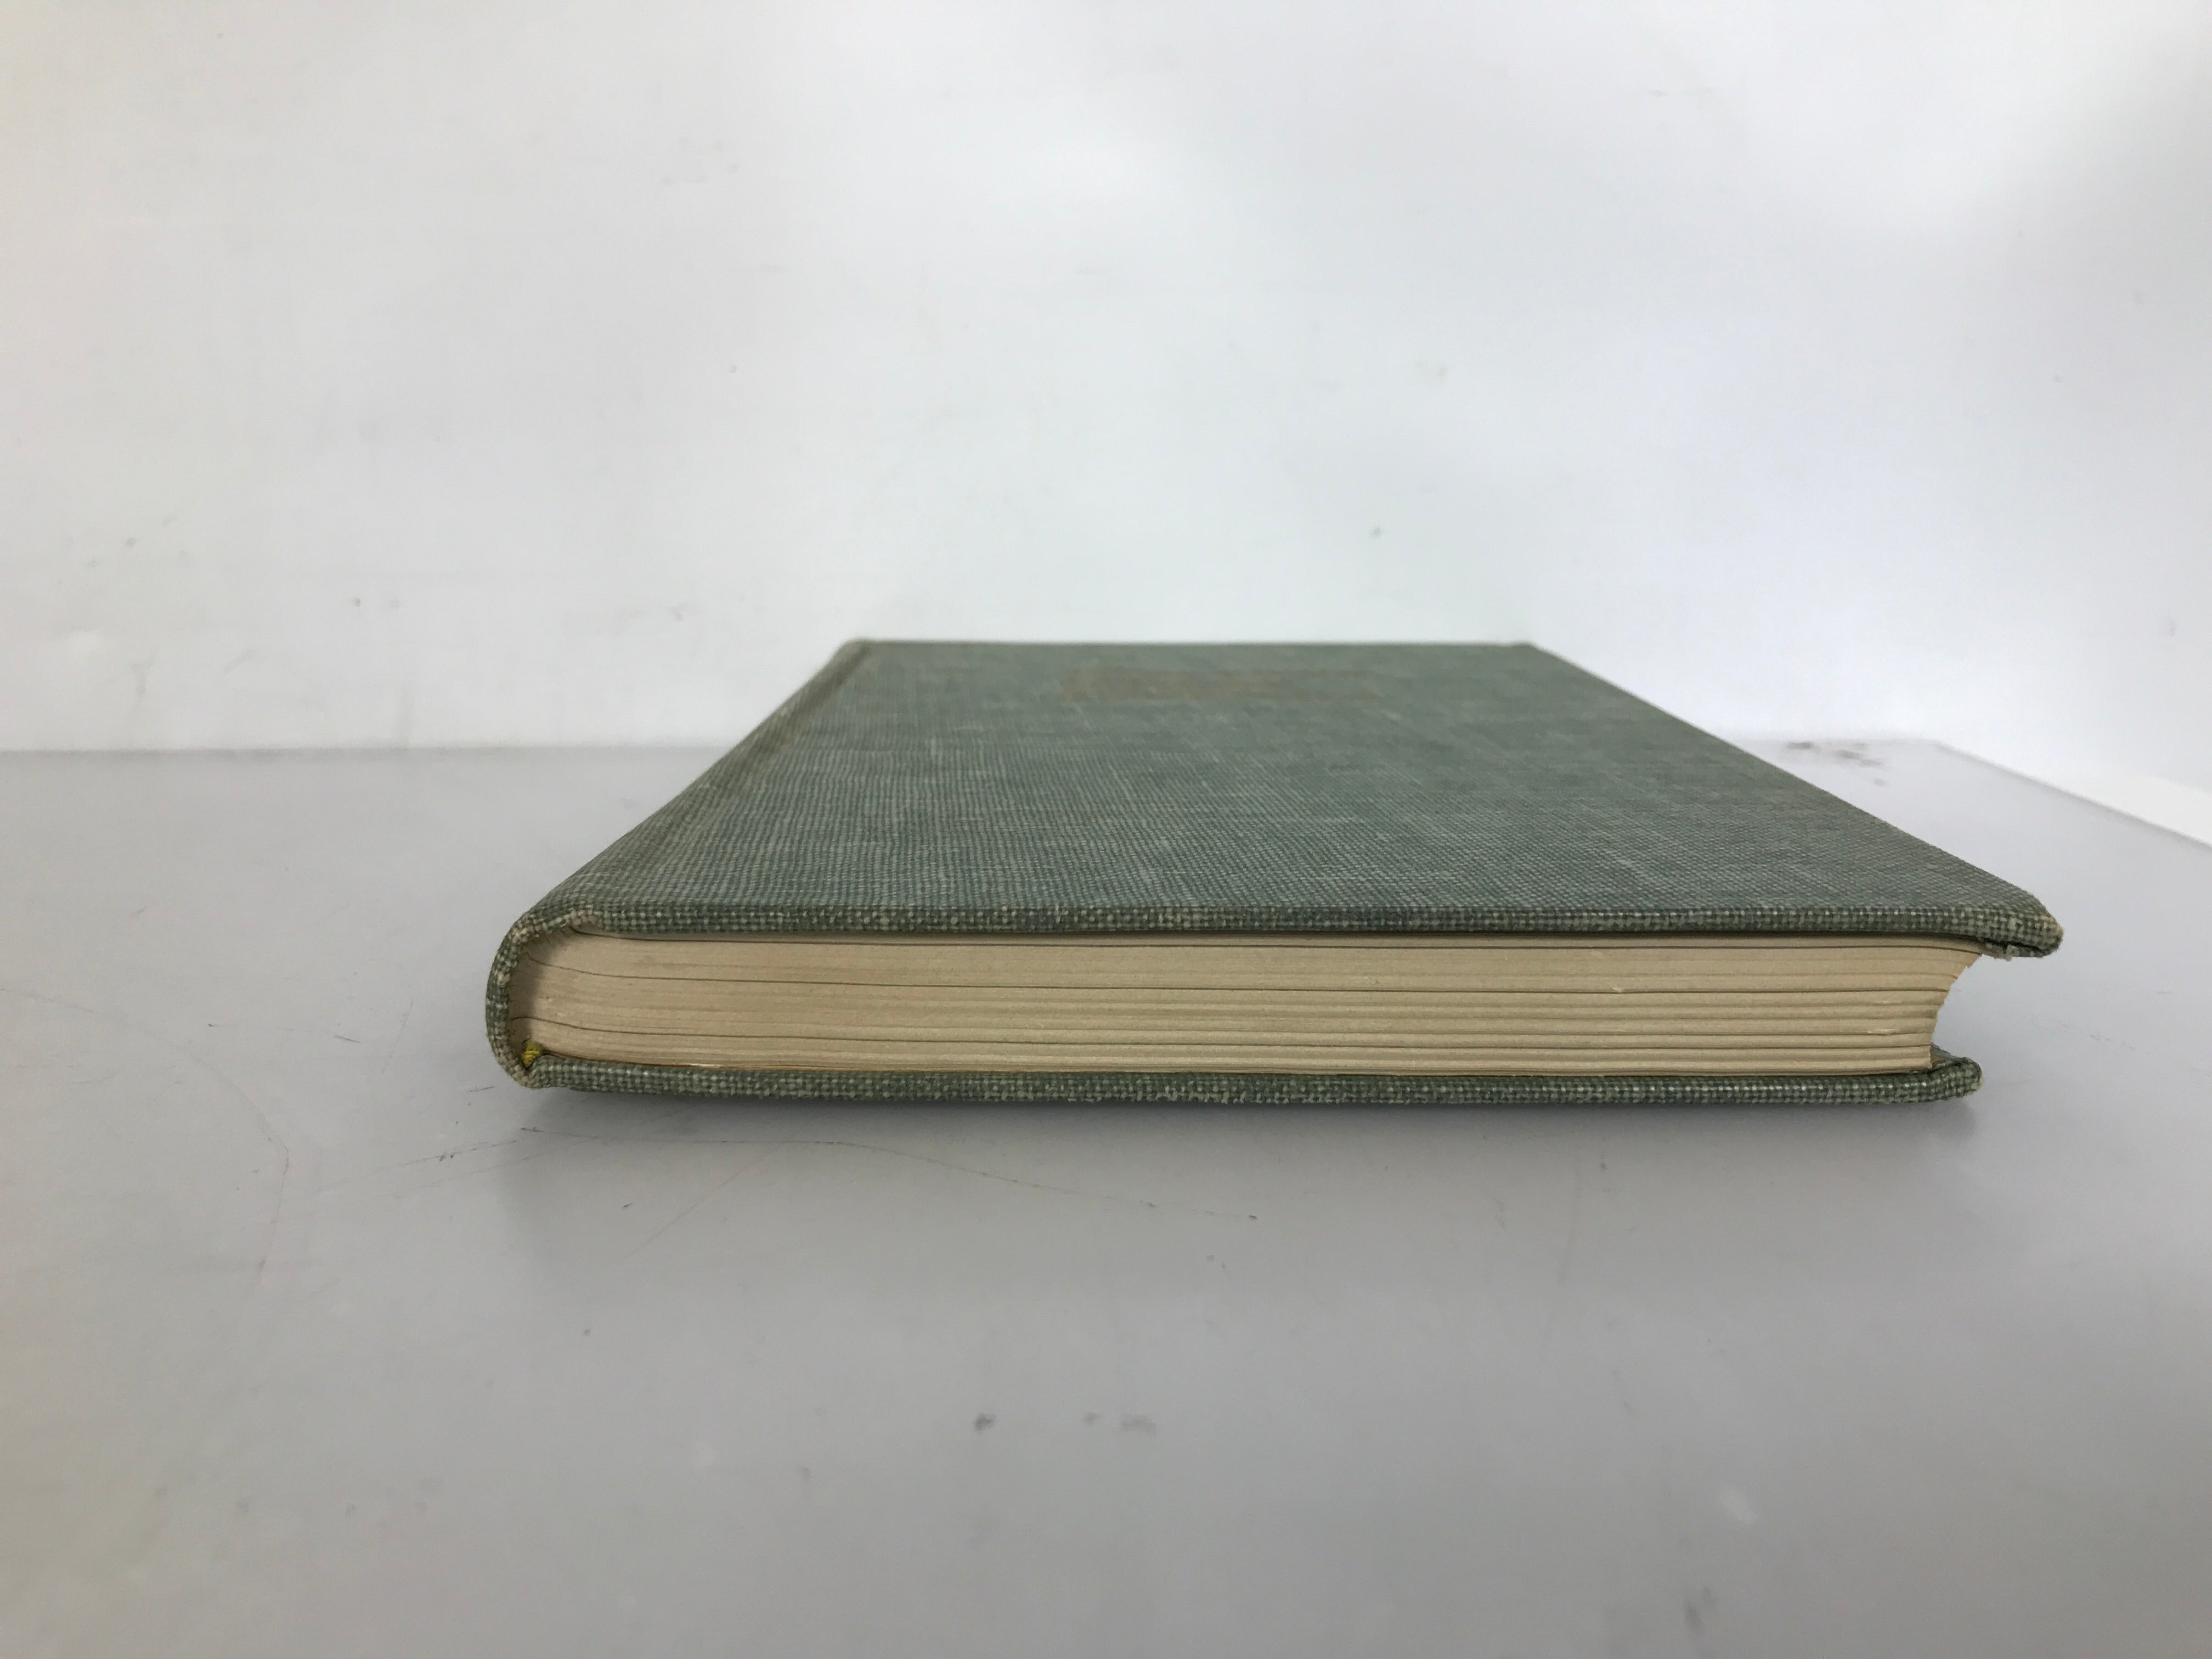 Wisconsin Grouse Problems by Wallace Grange 1948 HC